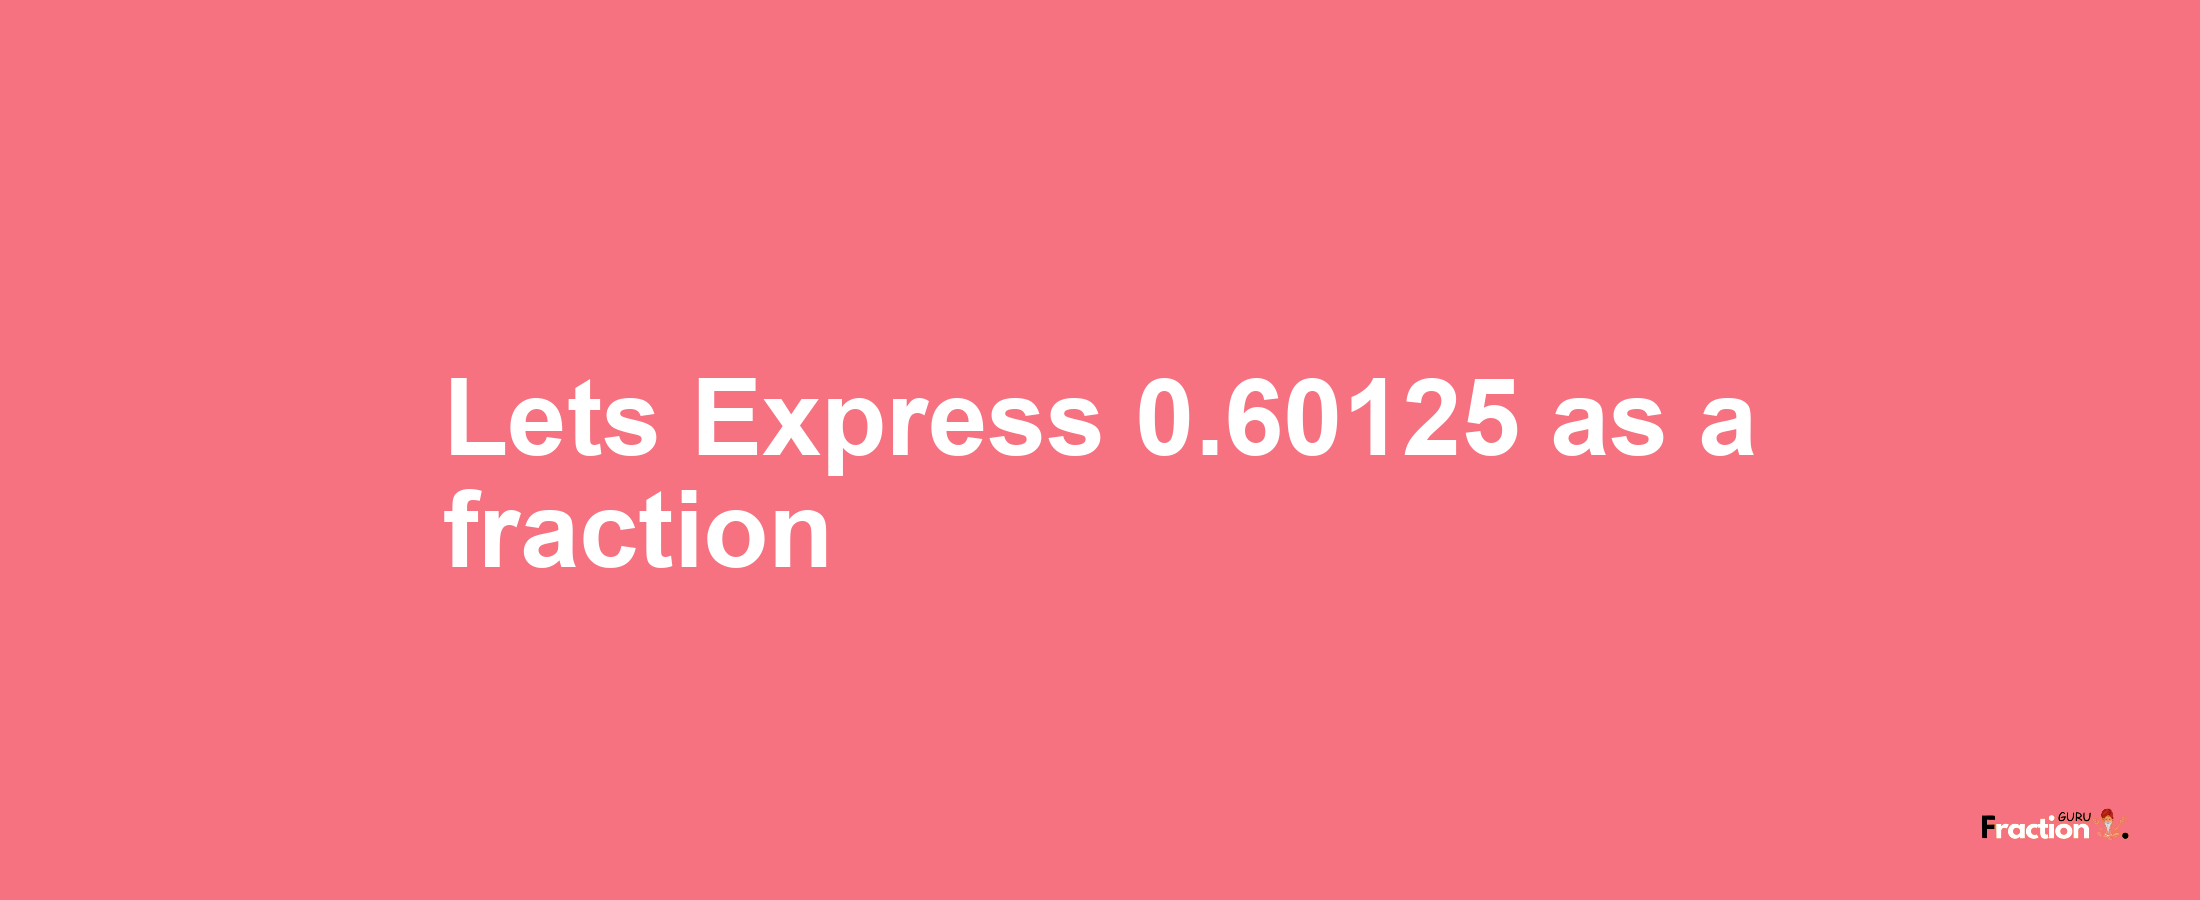 Lets Express 0.60125 as afraction